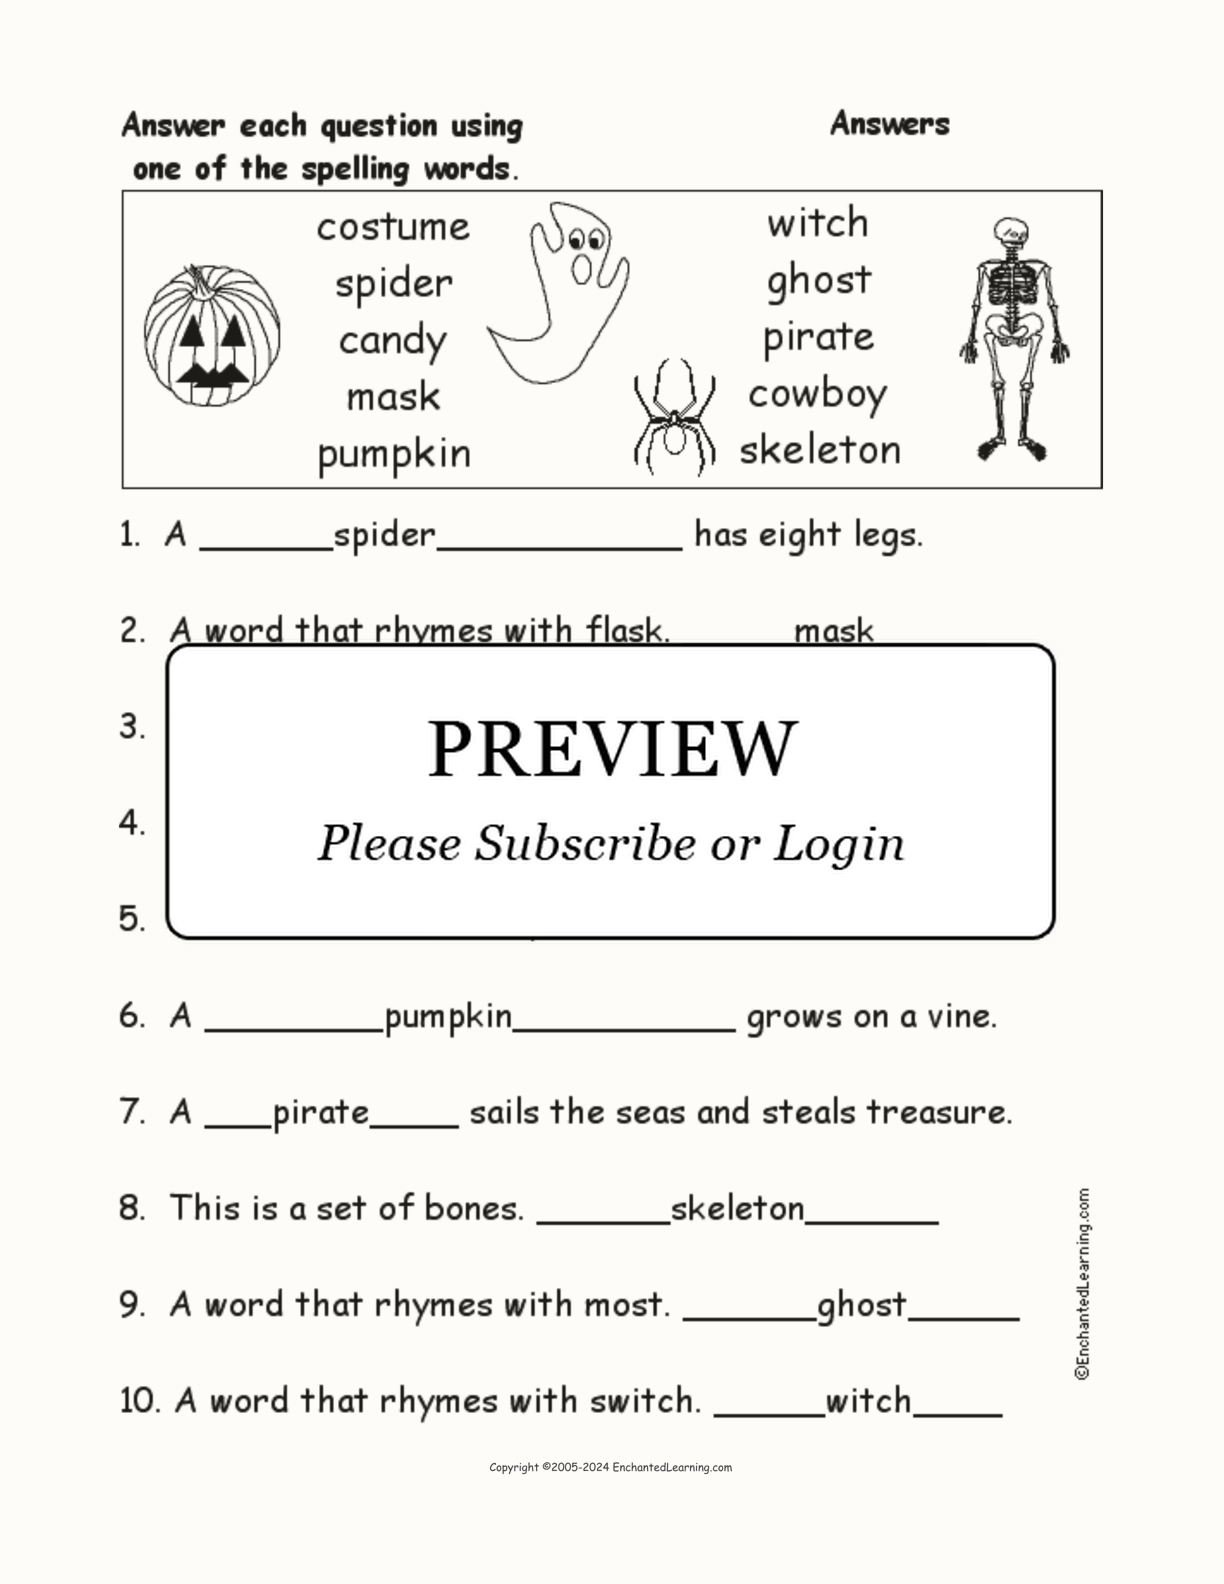 Halloween Spelling Word Questions interactive worksheet page 2